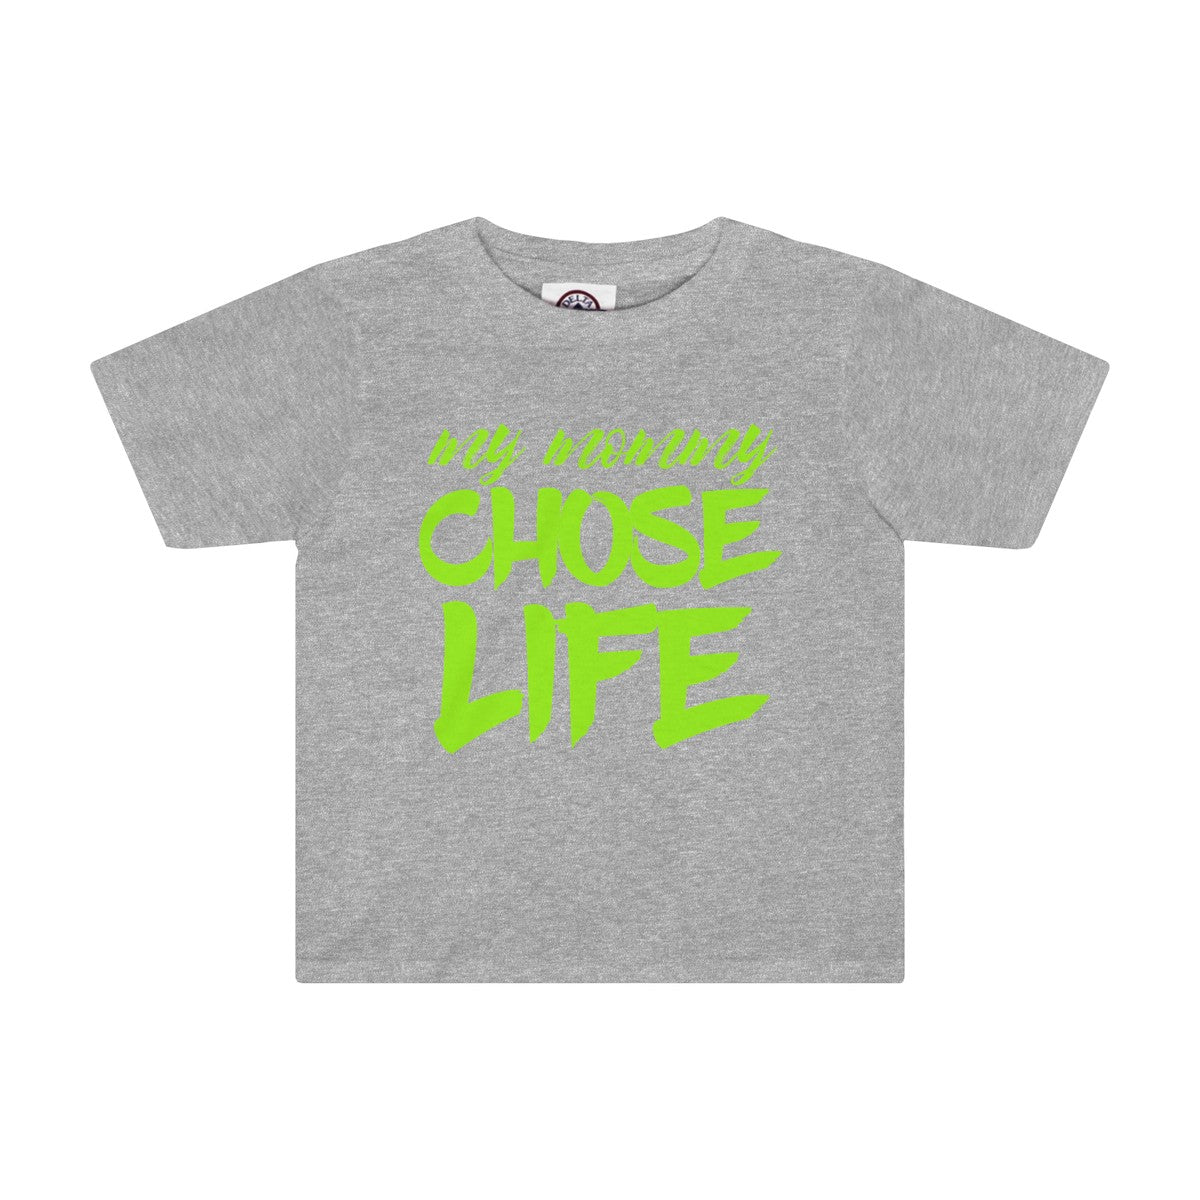 My Mommy Chose Life Kids Tee-Kids clothes-PureDesignTees